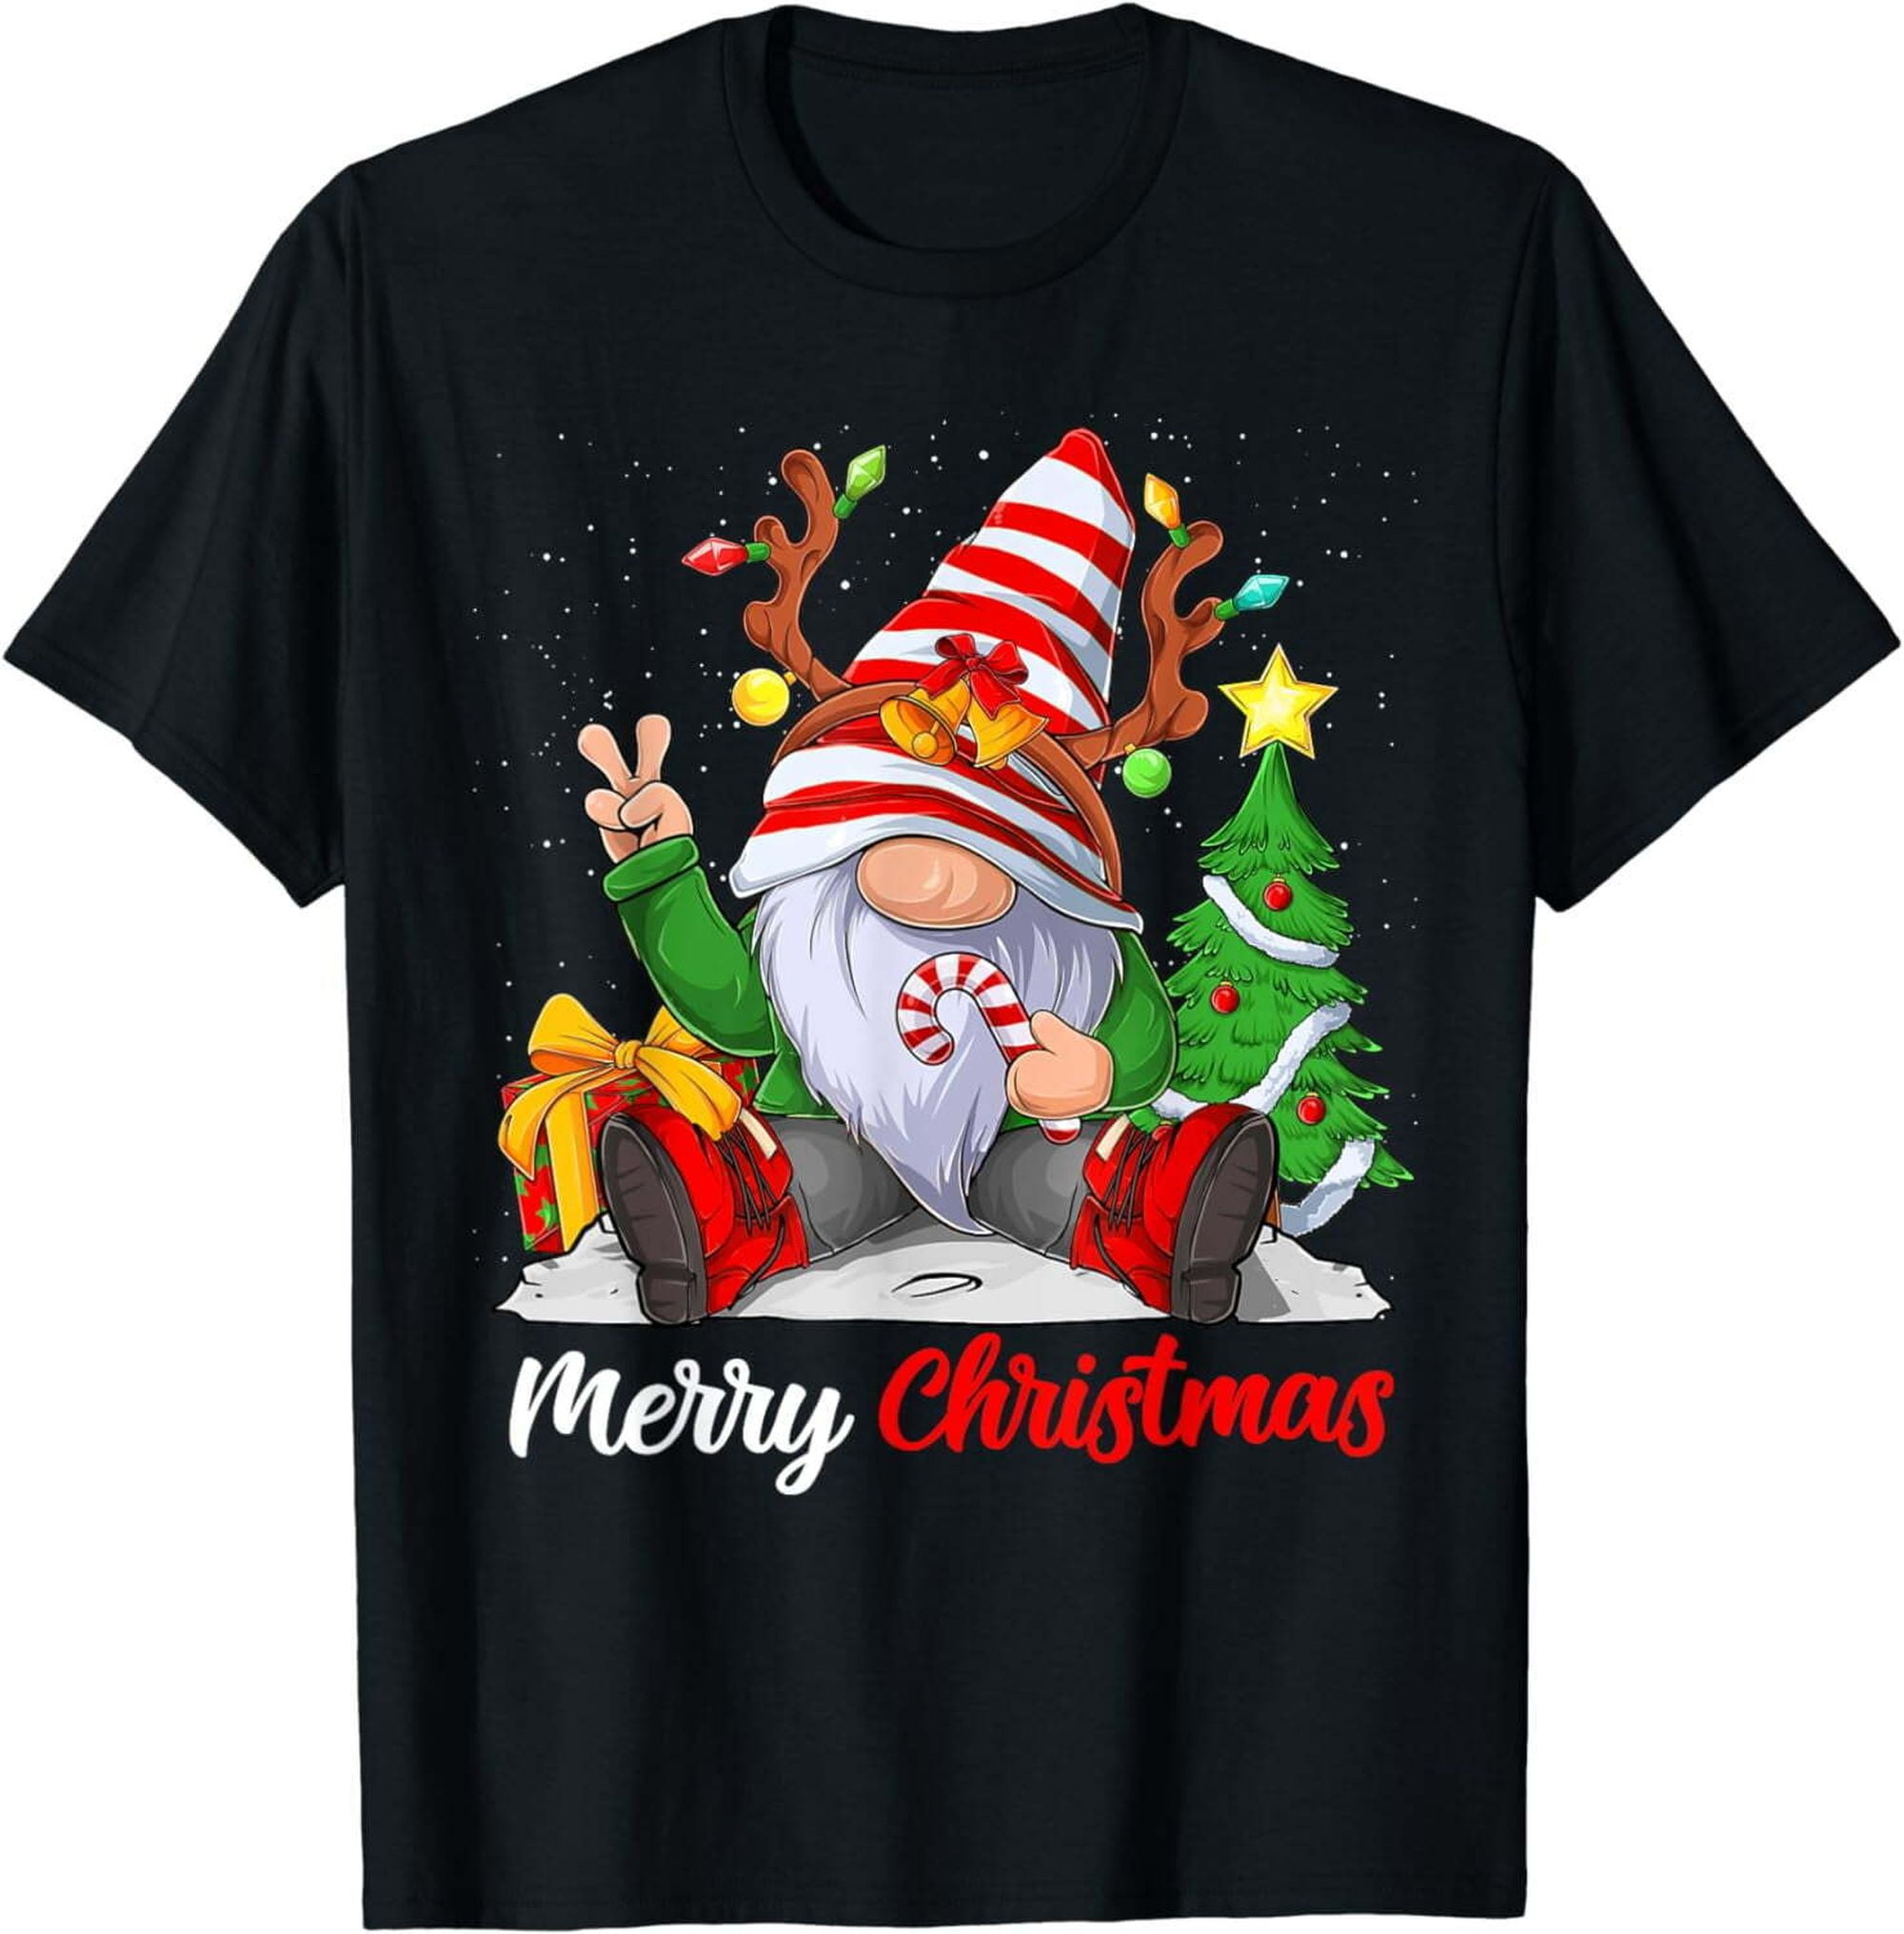 Spread Holiday Joy with Matching Christmas Gnome Couple Shirts ...